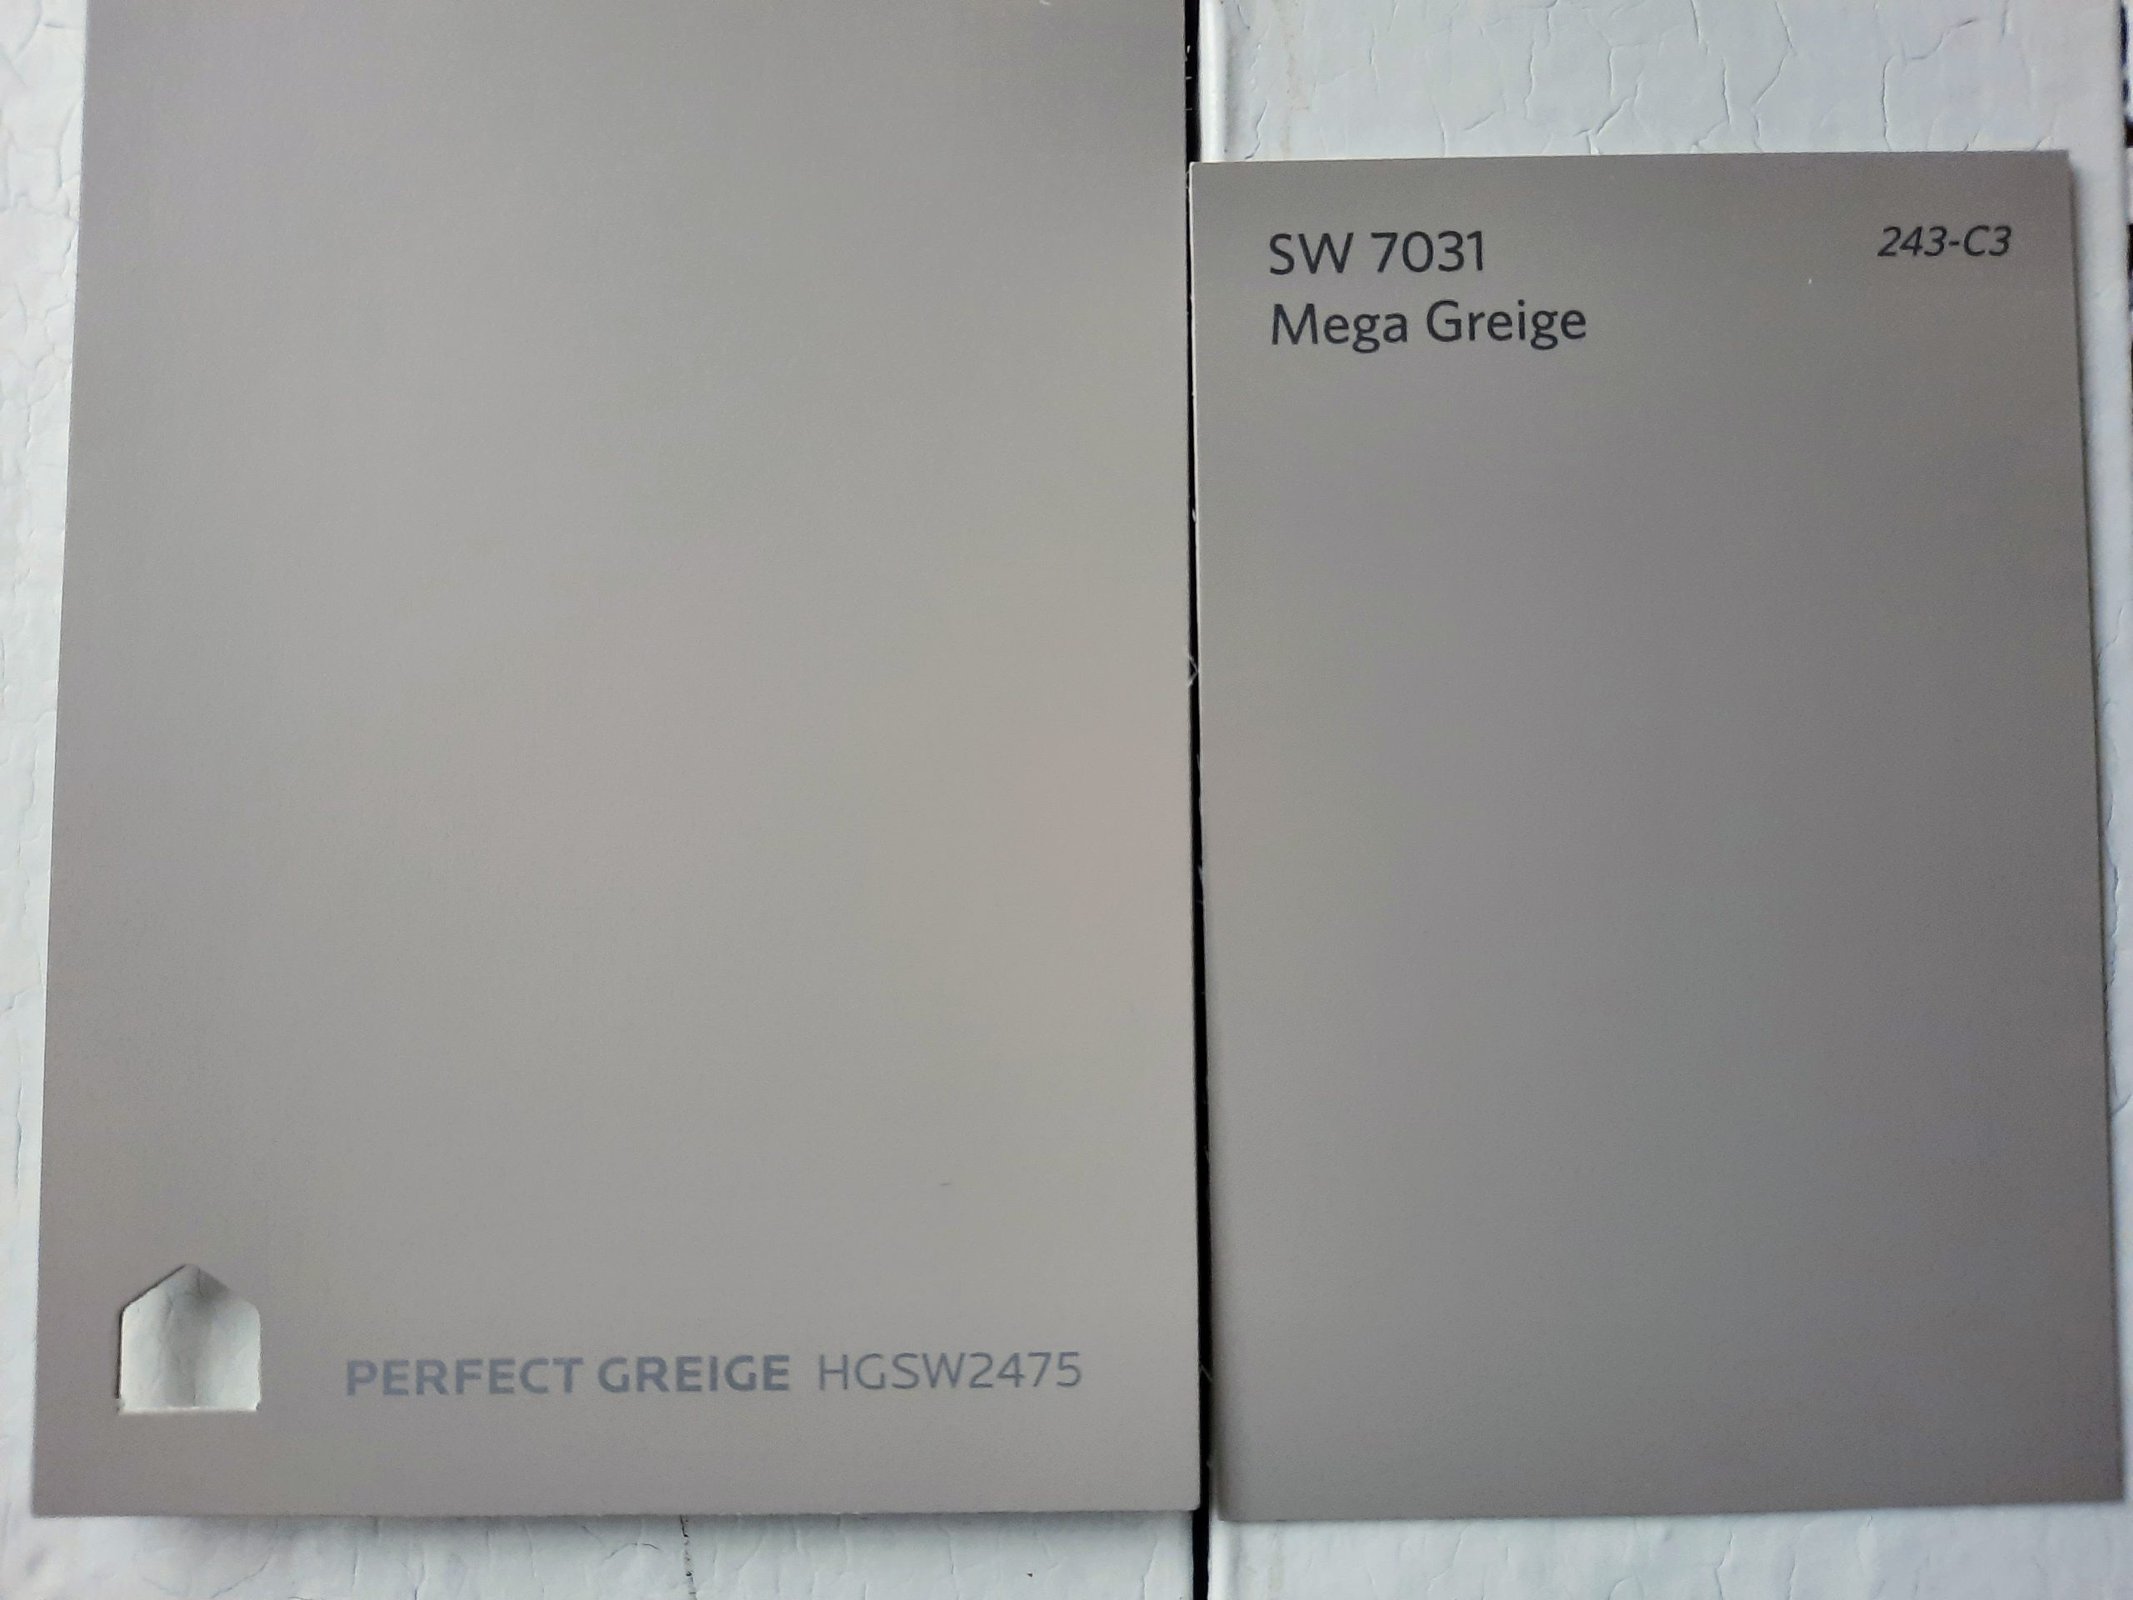 7 Perfect Greige vs Mega Greige by Sherwin Williams scaled